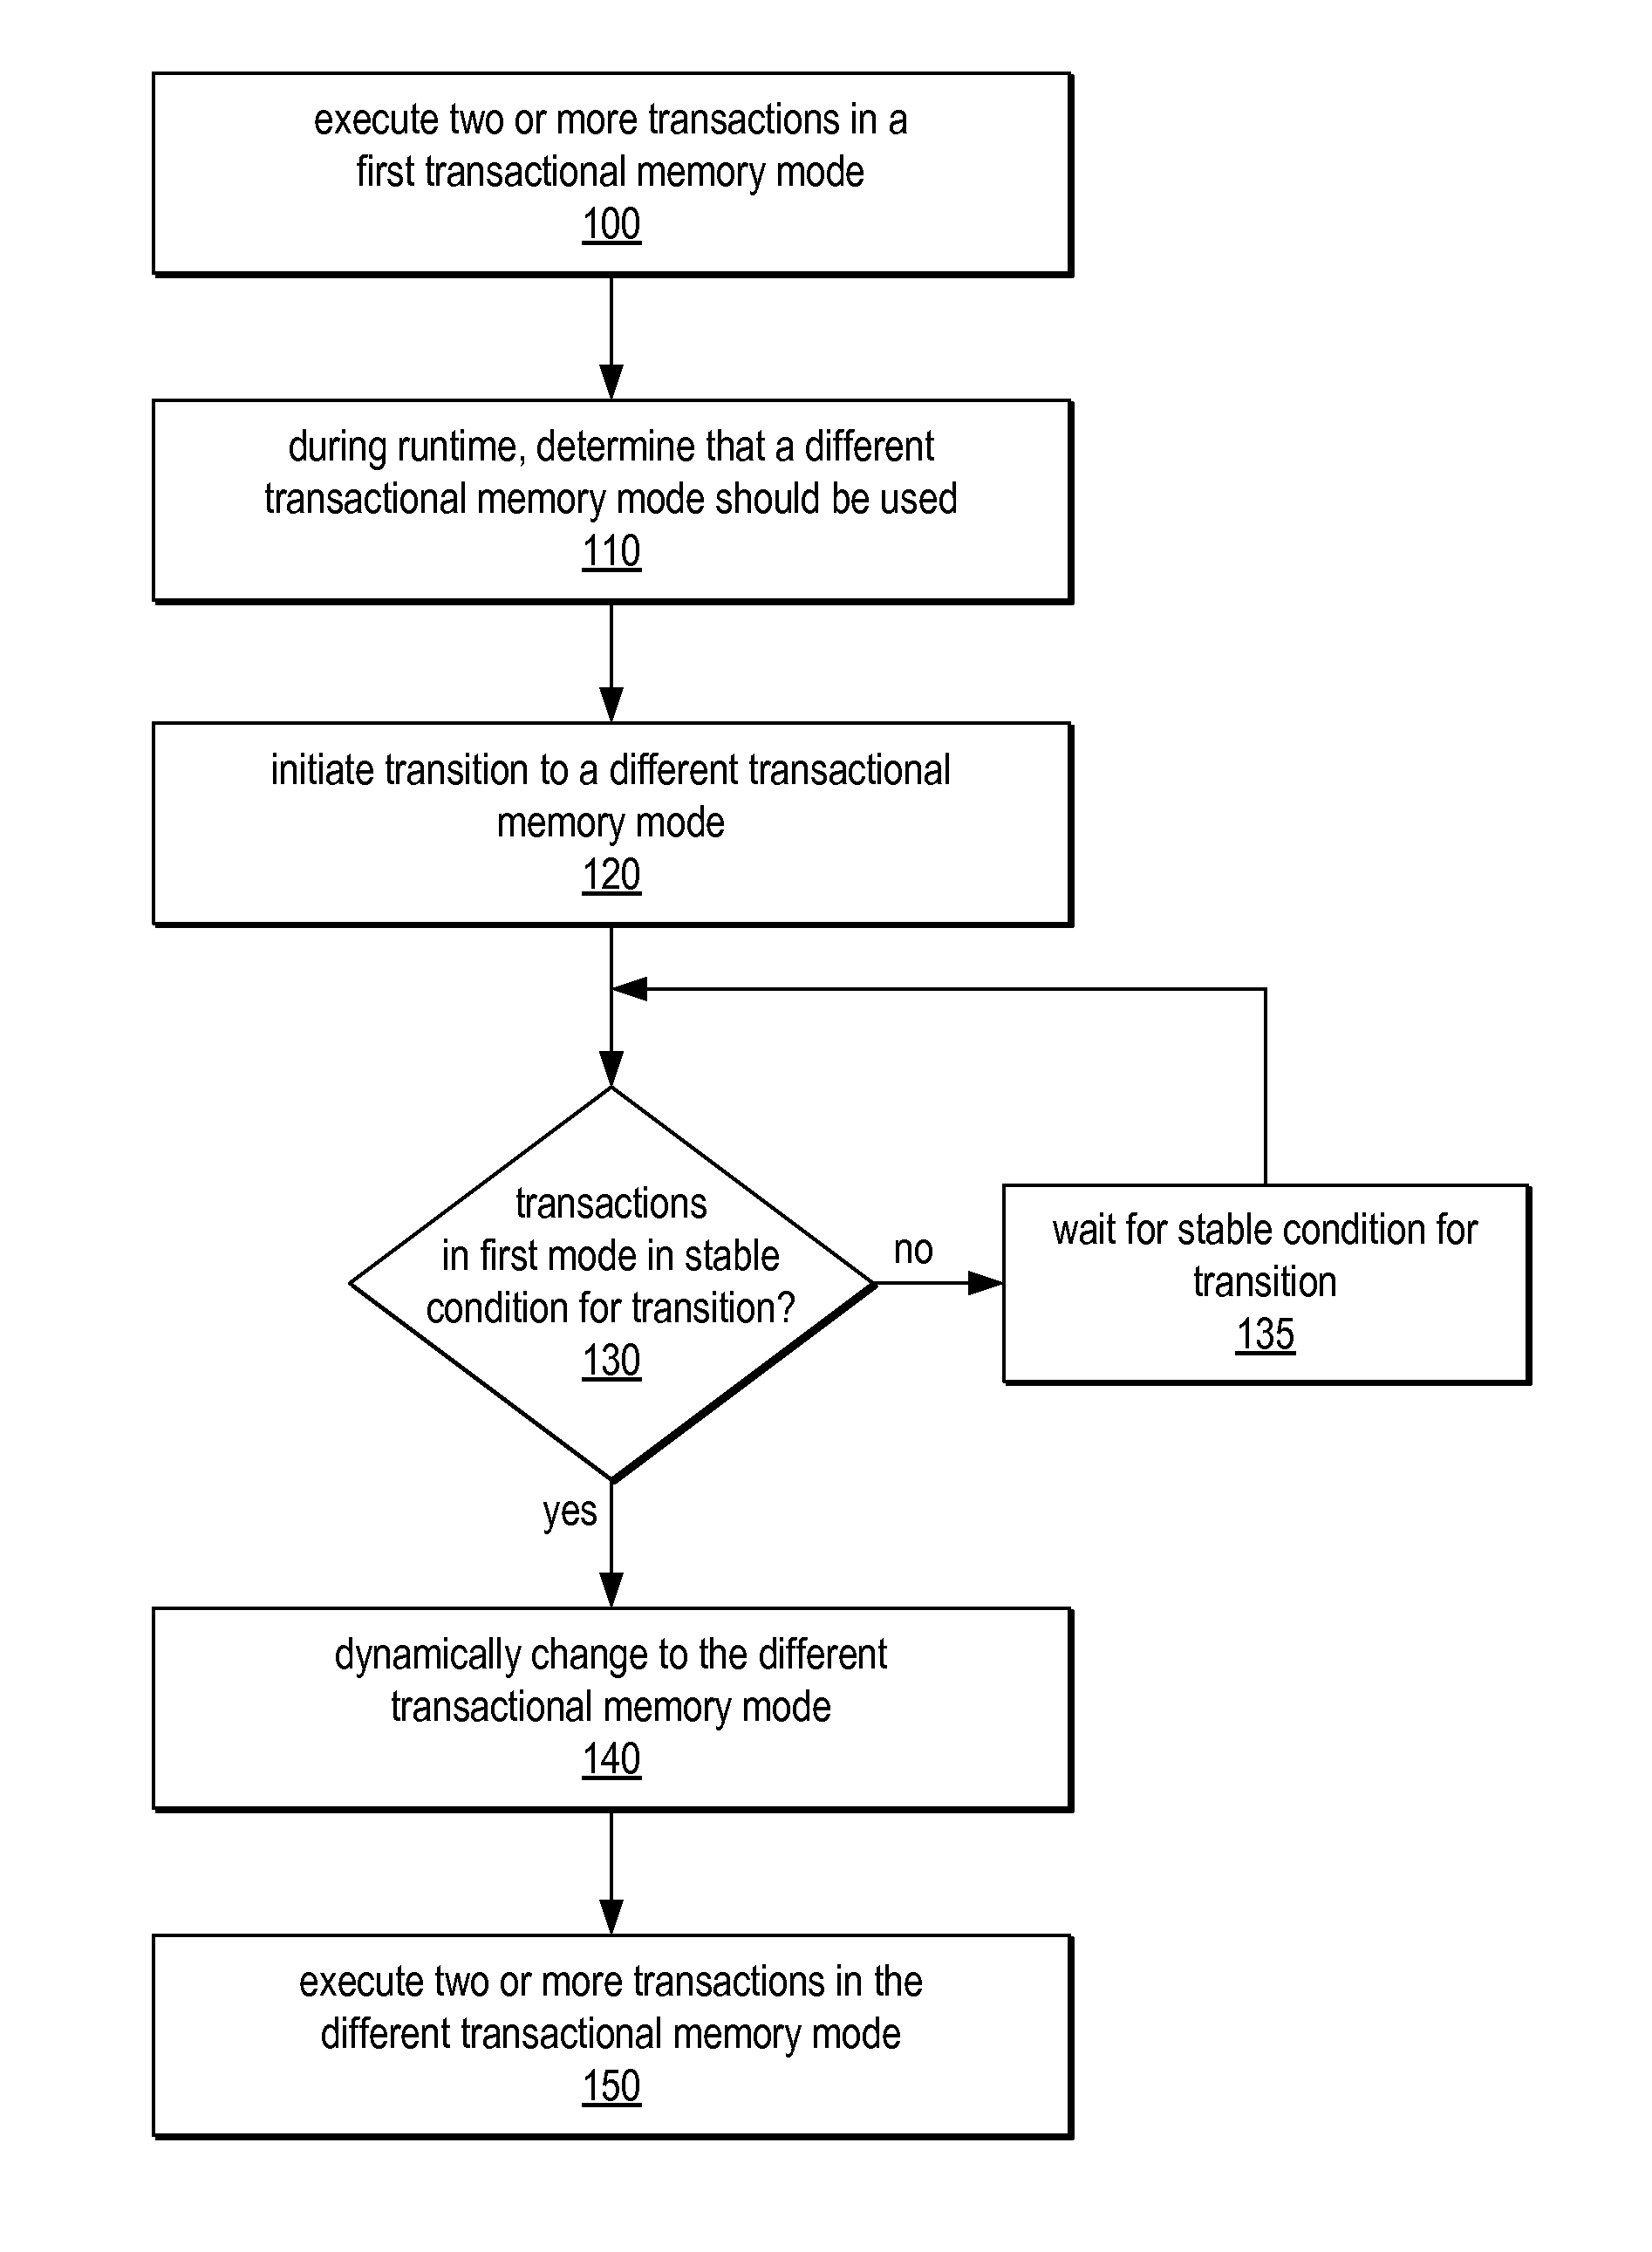 System and Method for Supporting Phased Transactional Memory Modes